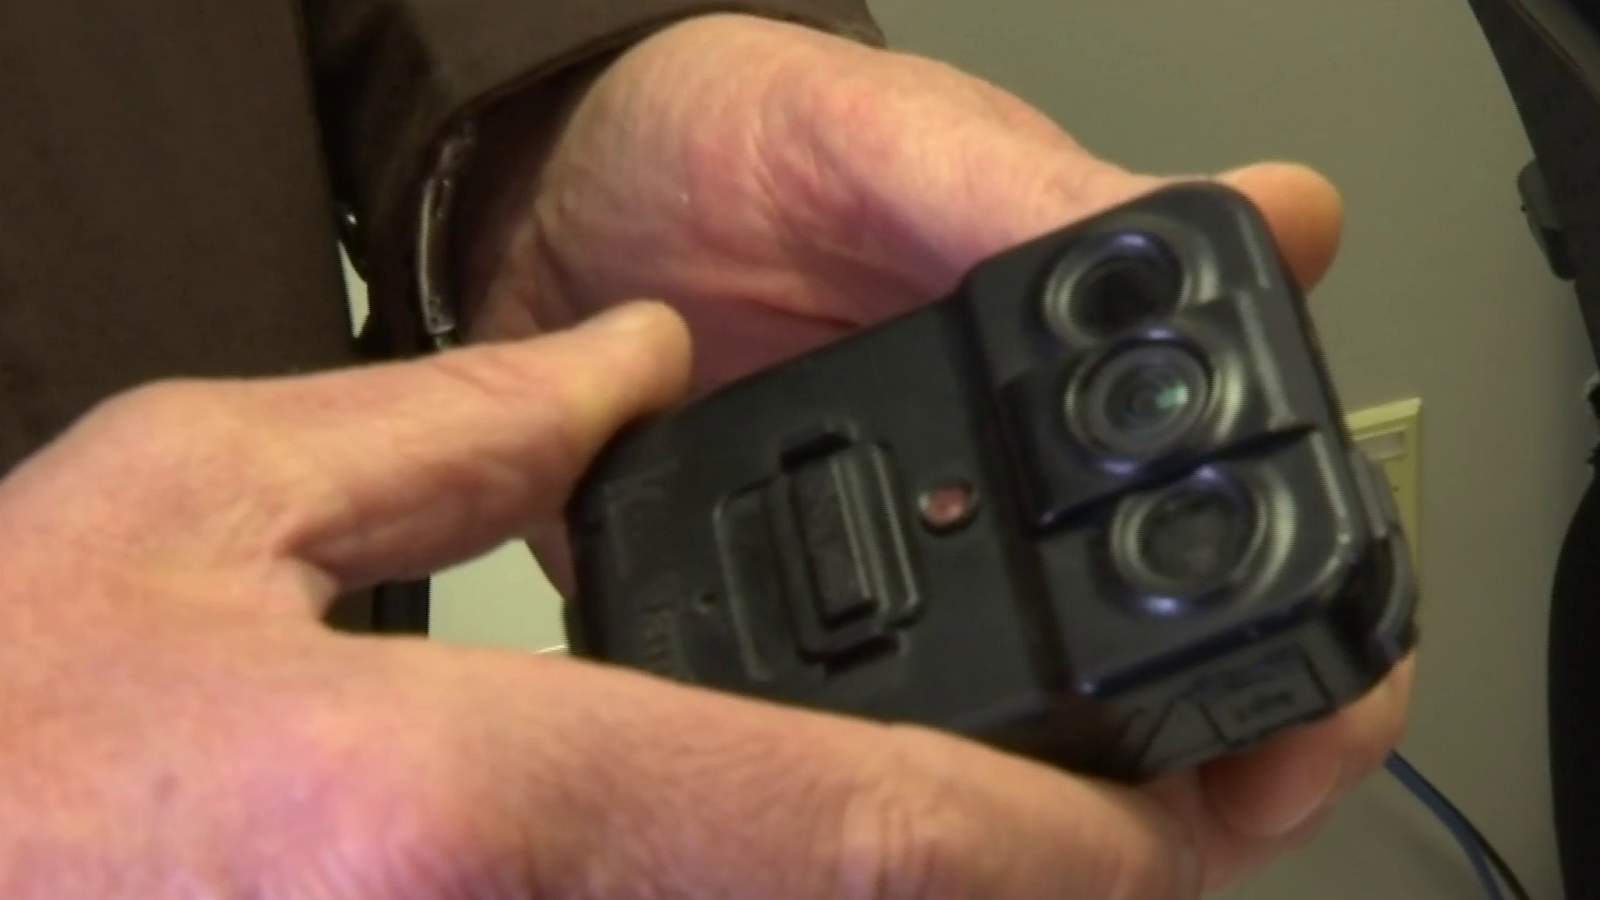 Bedford County Sheriff’s Office approved to apply for new body cameras